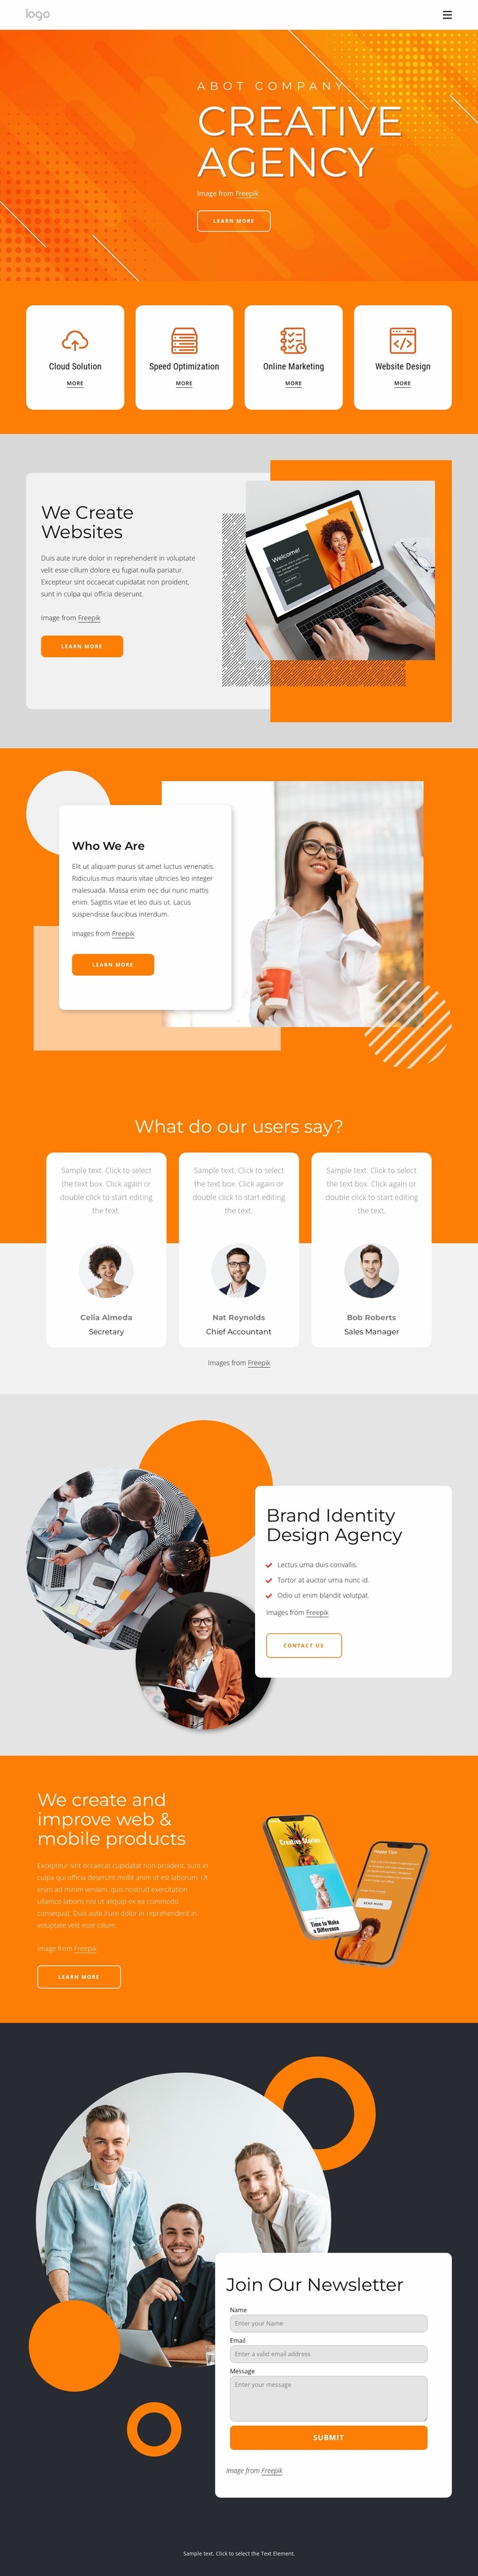 The creative agency for your next big thing Website Builder Templates